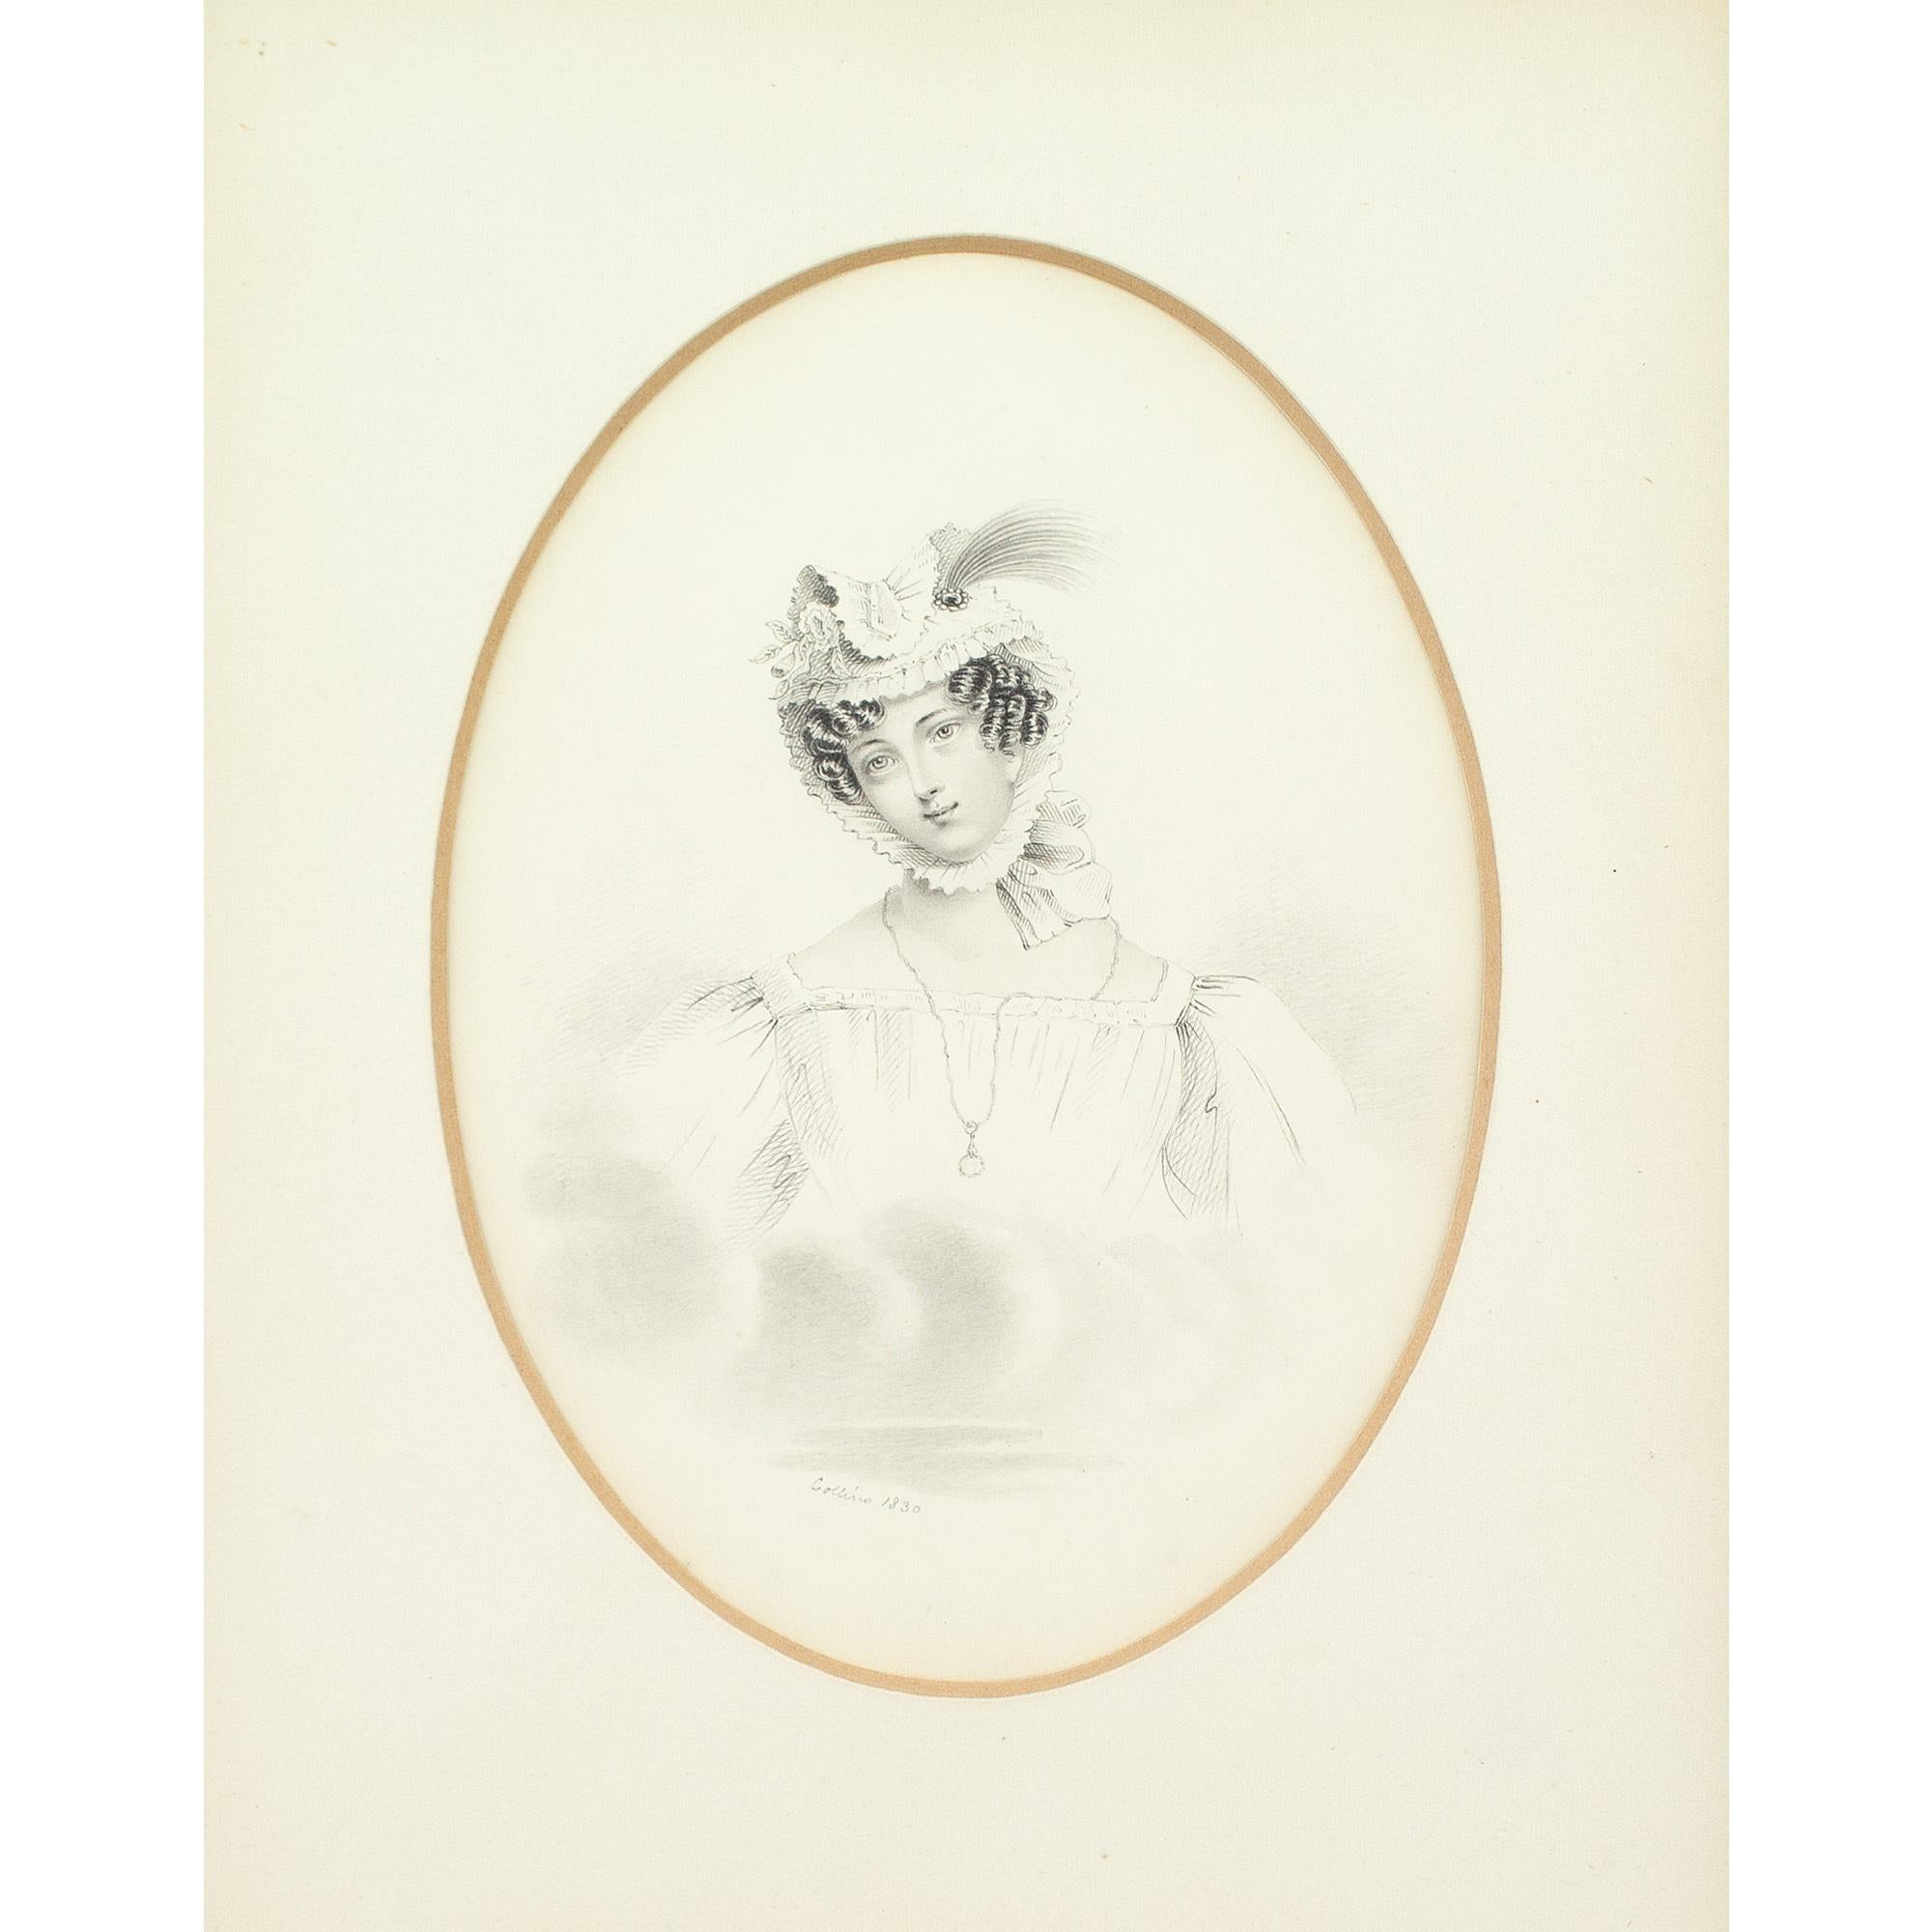 This exquisite early 19th-century drawing depicts a demure young lady wearing a dress with voluminous ‘gigot’ sleeves, necklace and elaborate bonnet. It’s signed ‘Collins’.

Styled akin to a Parisian fashion plate, this remarkably detailed work